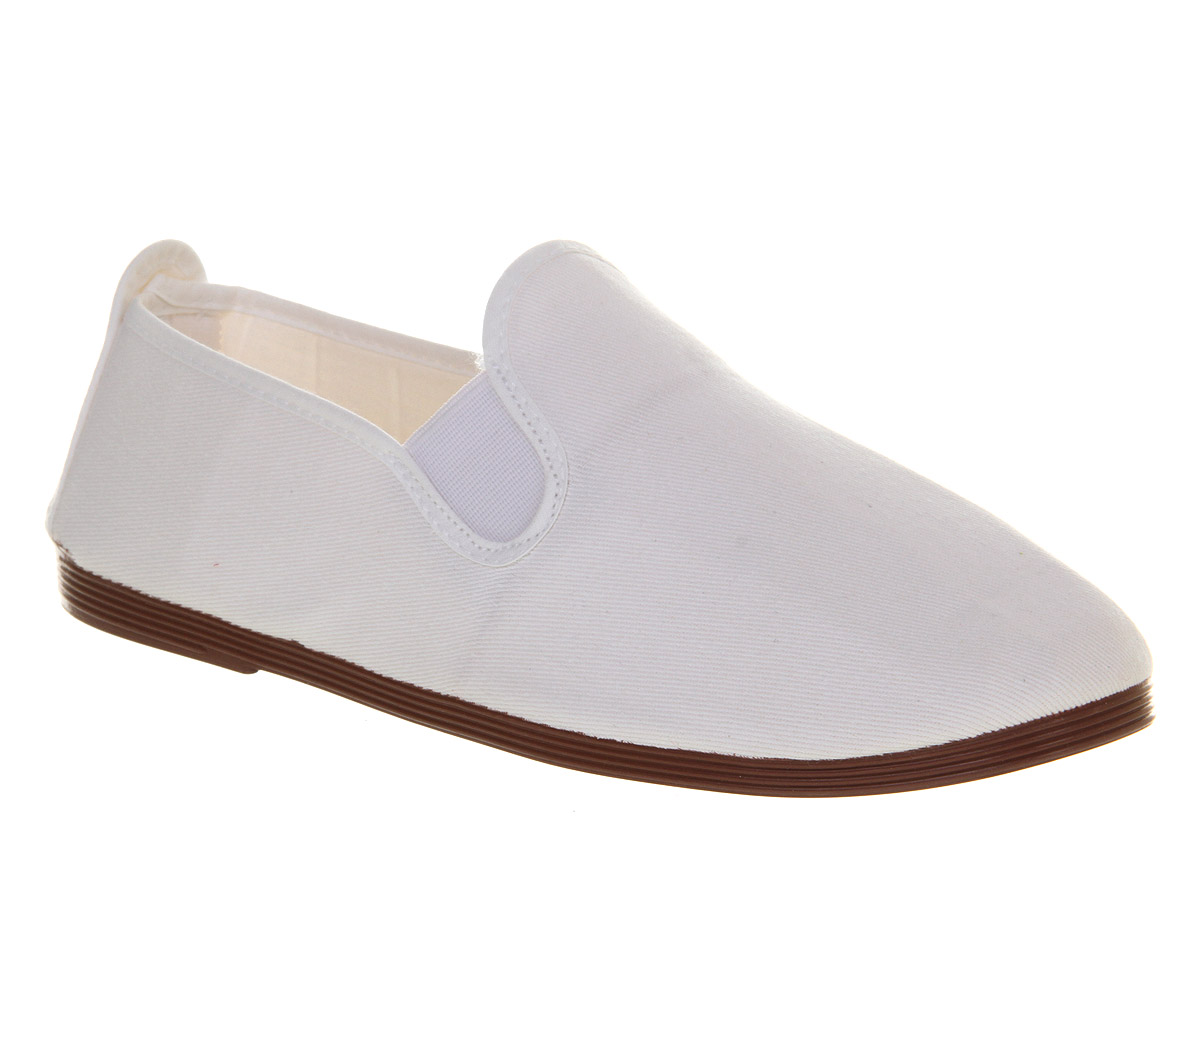 Flossy Flossy Plimsoles White Canvas - Men's Casual Shoes